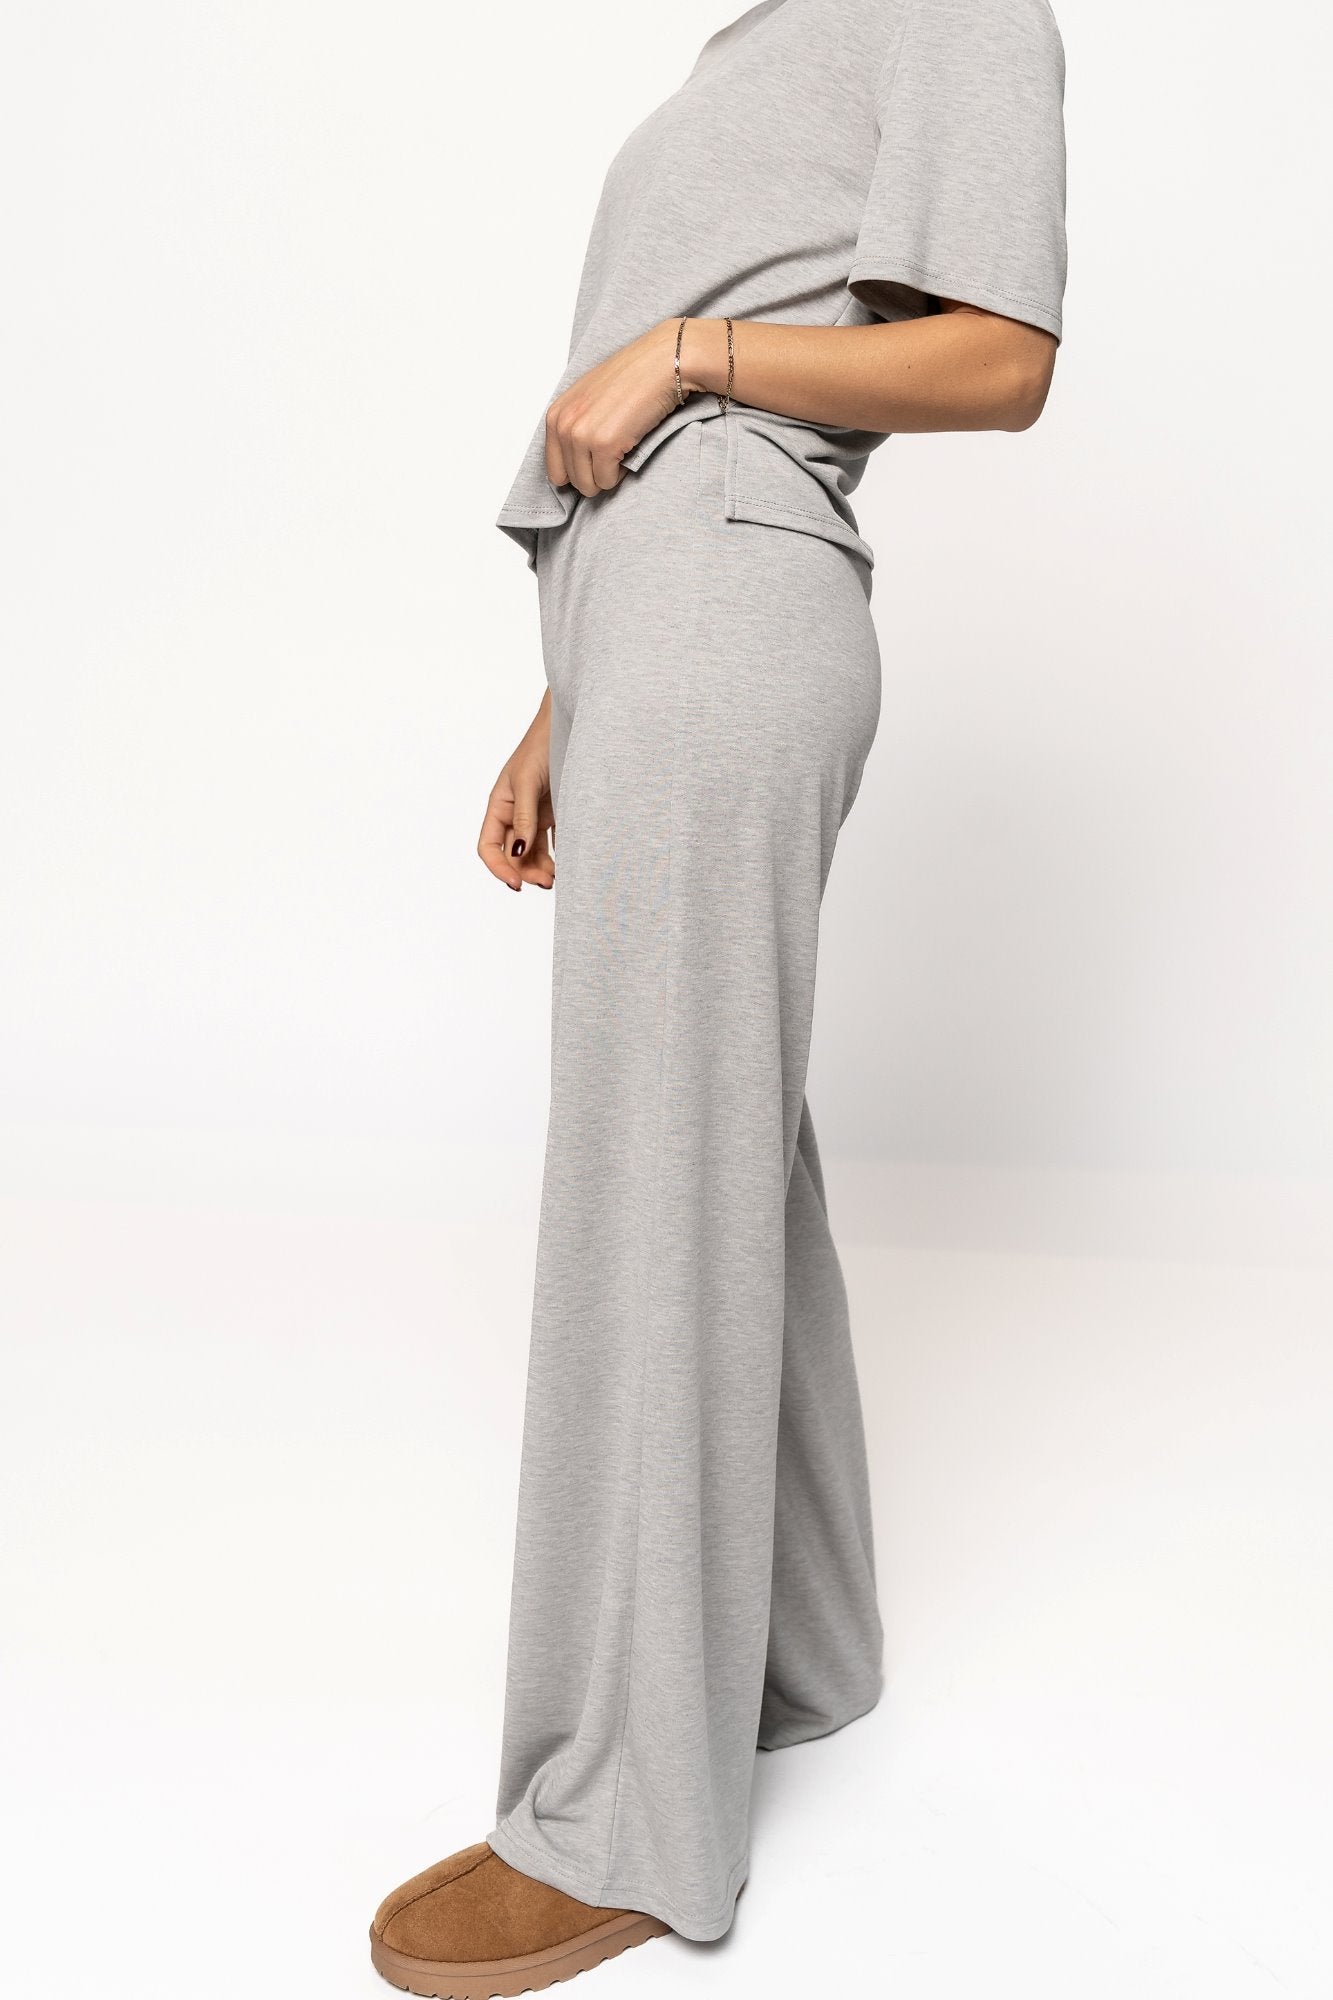 Ever Pant in Grey Holley Girl 